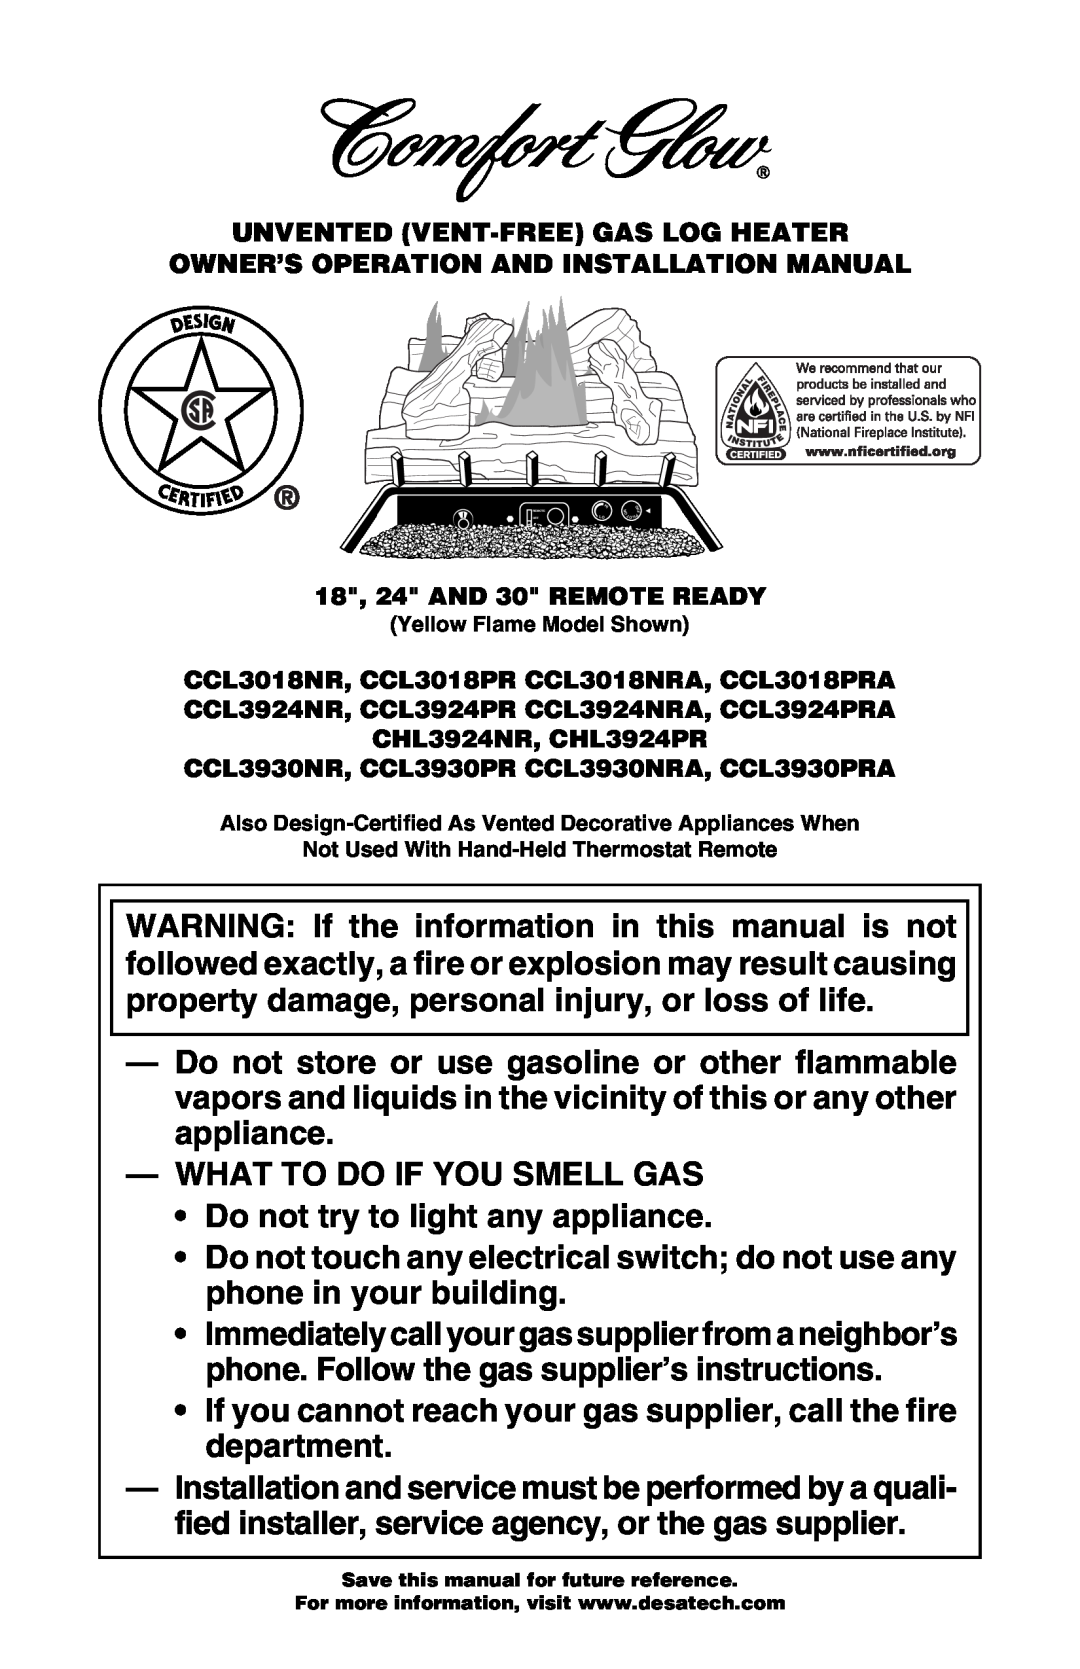 Desa Tech CCL3018NR, CCL3930PRA installation manual What To Do If You Smell Gas 